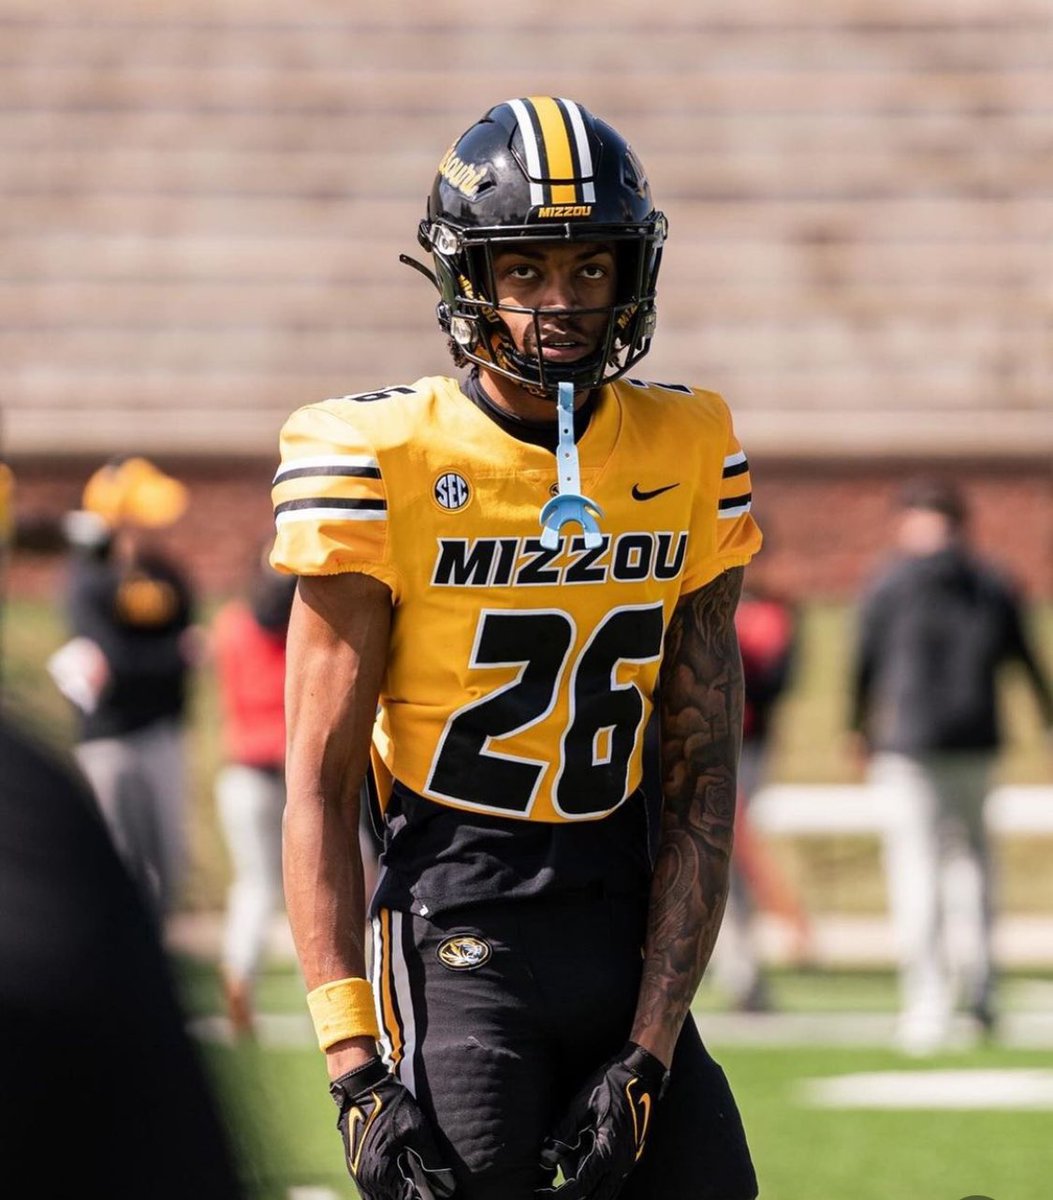 BLESSED! To receive an offer from The University of Missouri via @coachalpogue #agtg @JohnGarcia_Jr @ChadSimmons_ @SWiltfong_ @Andrew_Ivins @TheUCReport @TomLuginbill @adamgorney